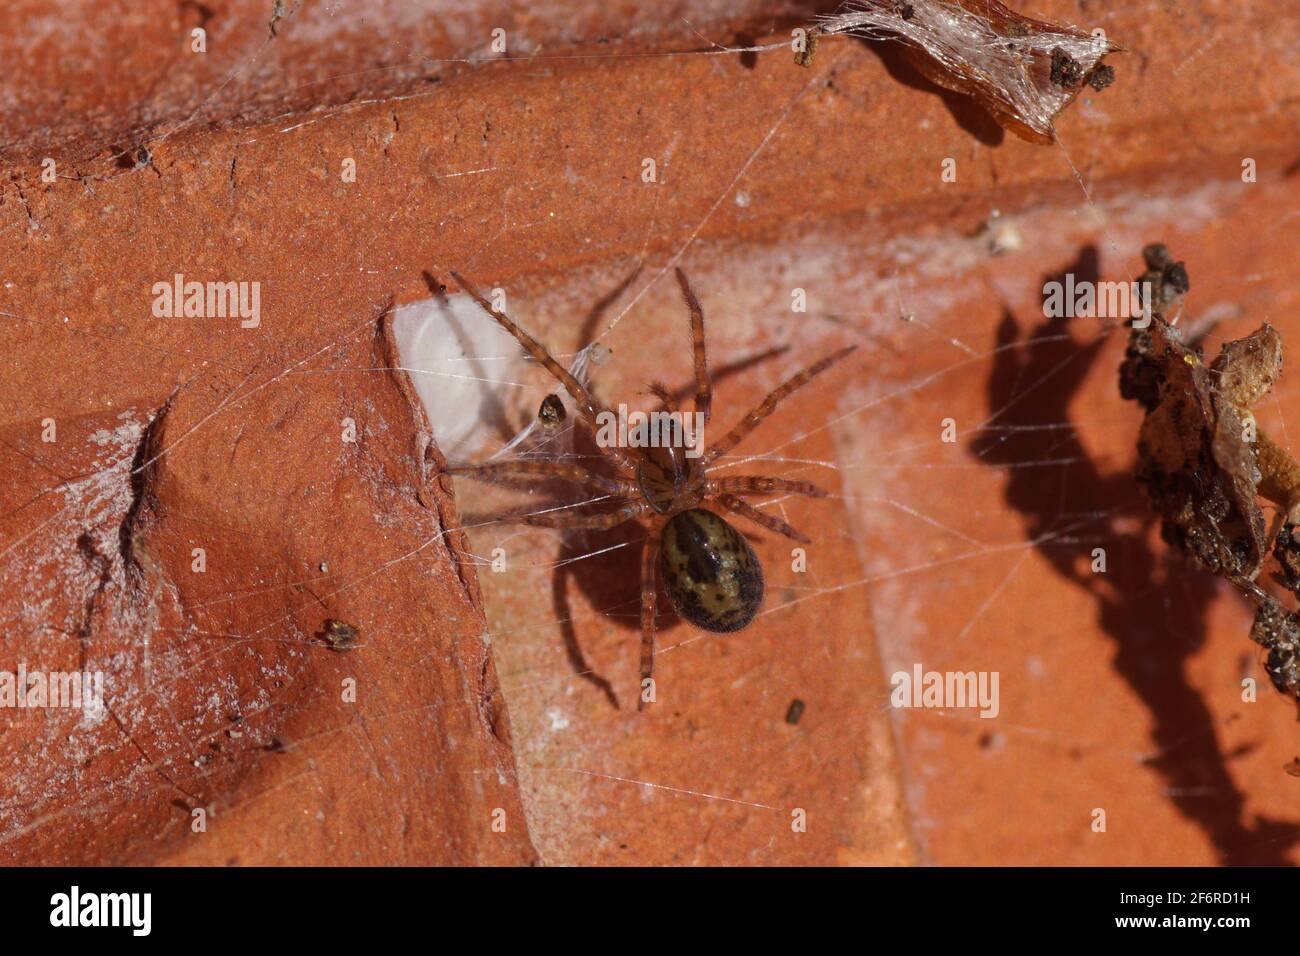 Under faded cobwebs and under a roof tile on the ground. Window spider, Amaurobius fenestralis or Amaurobius similis. Family tangled nest spiders Stock Photo